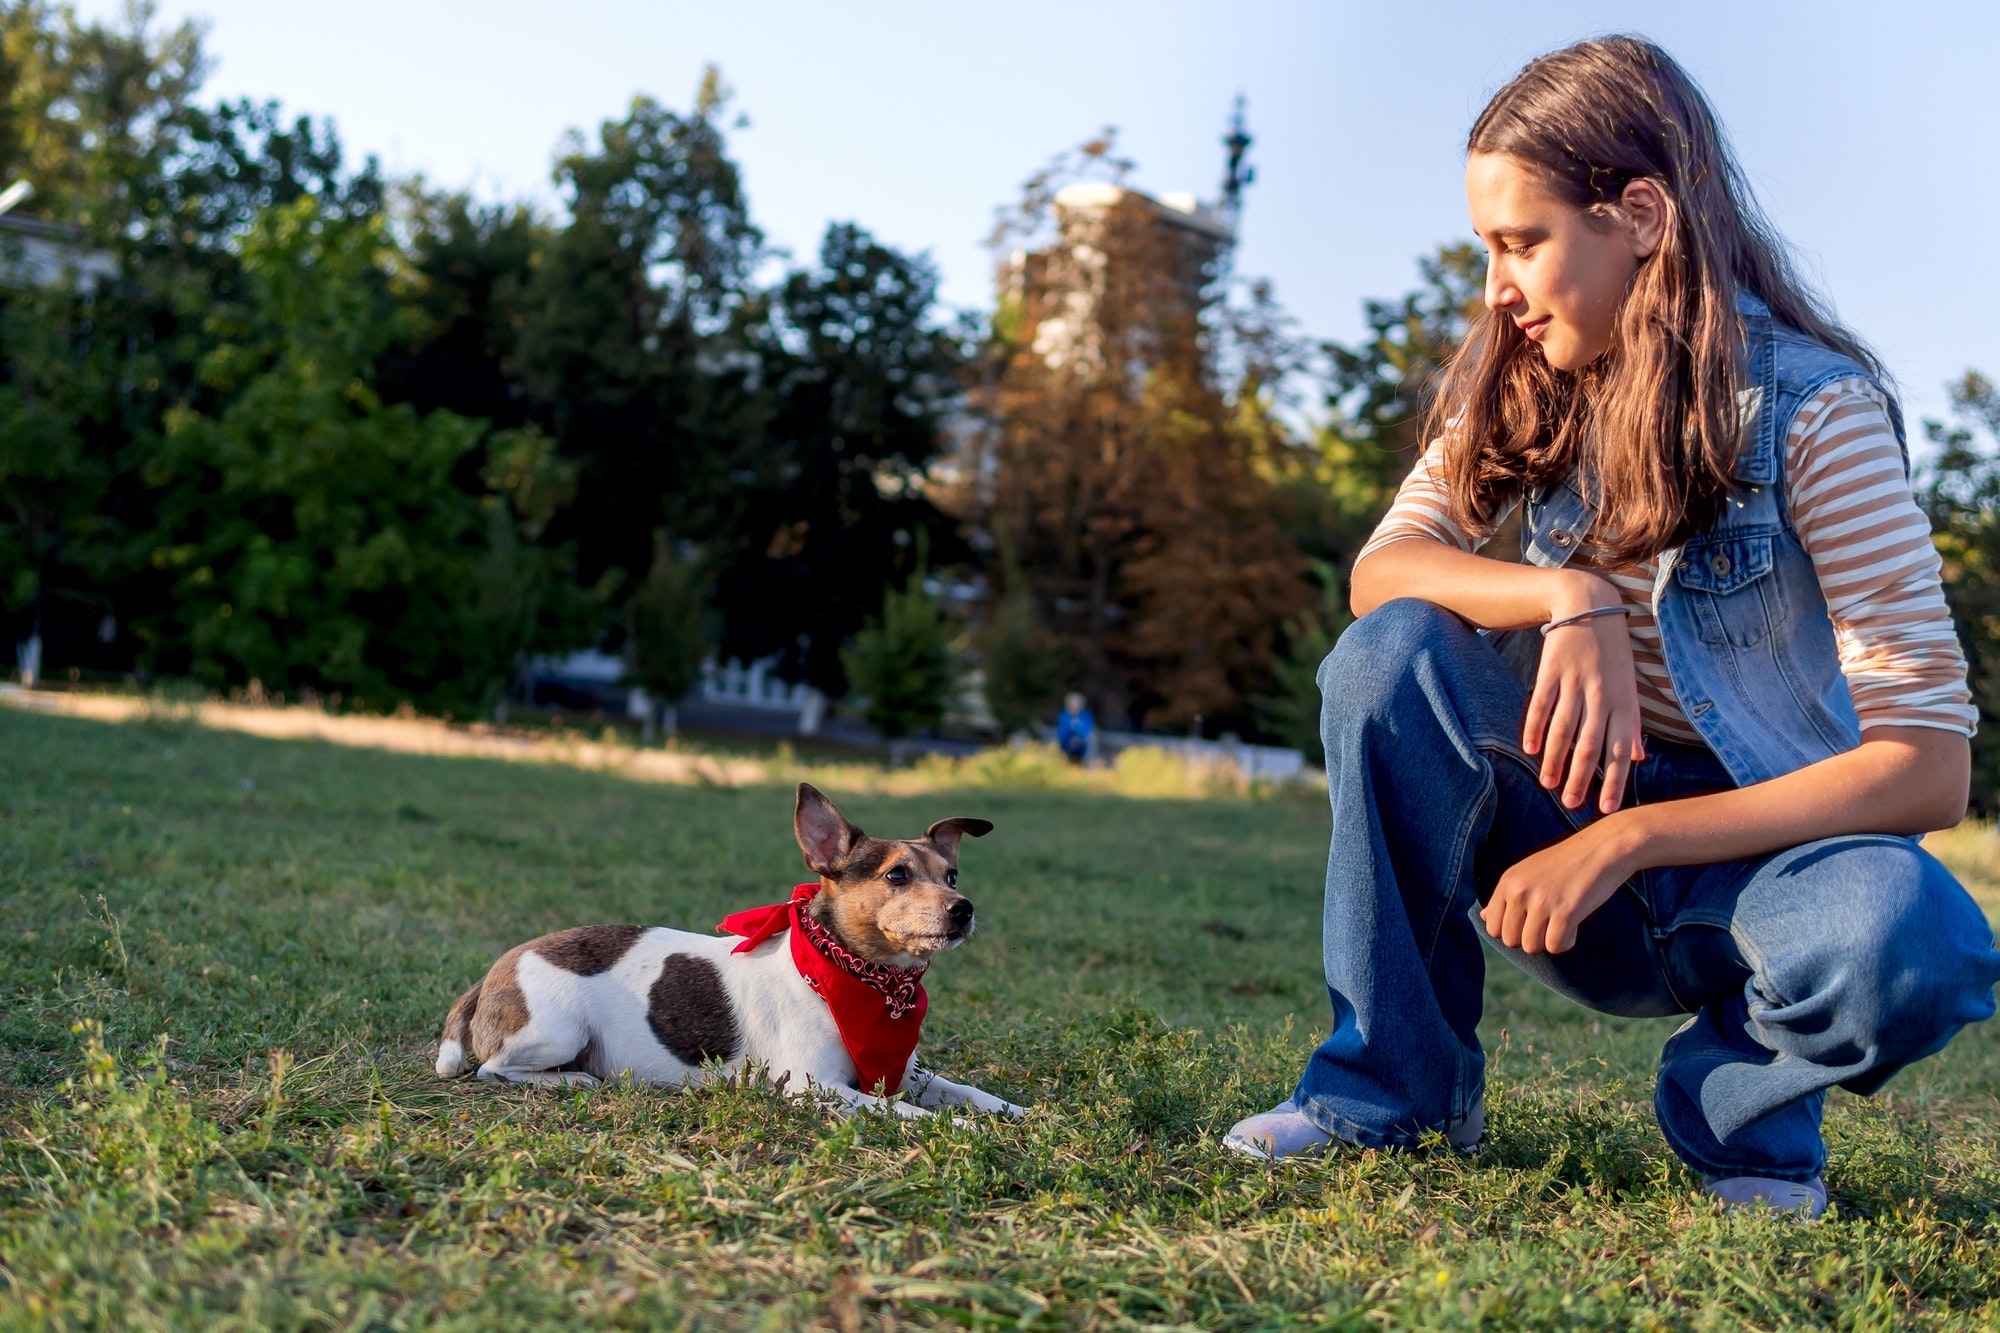 a-teenage-girl-trains-a-cute-pet-dog-jack-russell-on-the-grass-in-a-doggy-park-in-the-autumn-evening.jpg